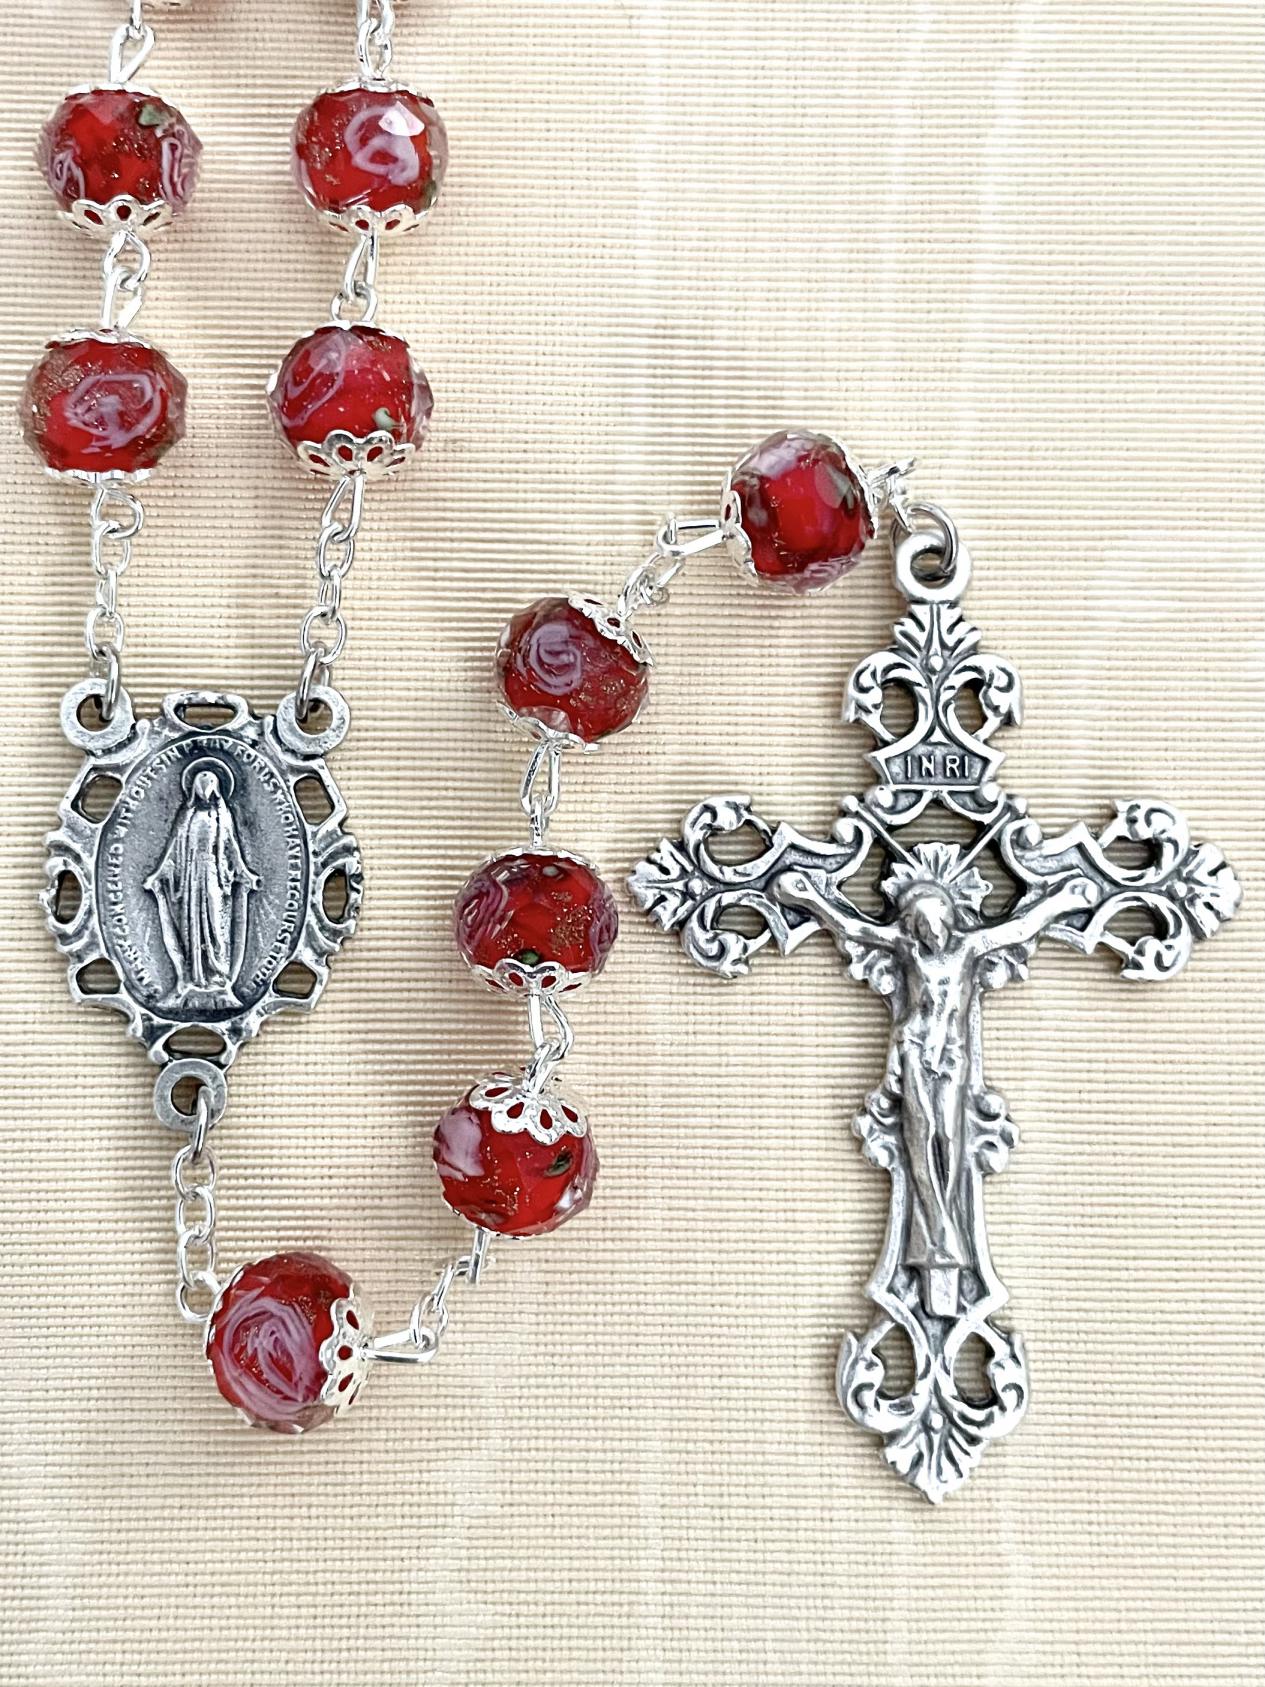 10X8 RUBY CRYSTAL HAND PAINTED ROSE ROSARY WITH CAPS. GIFT BOXED